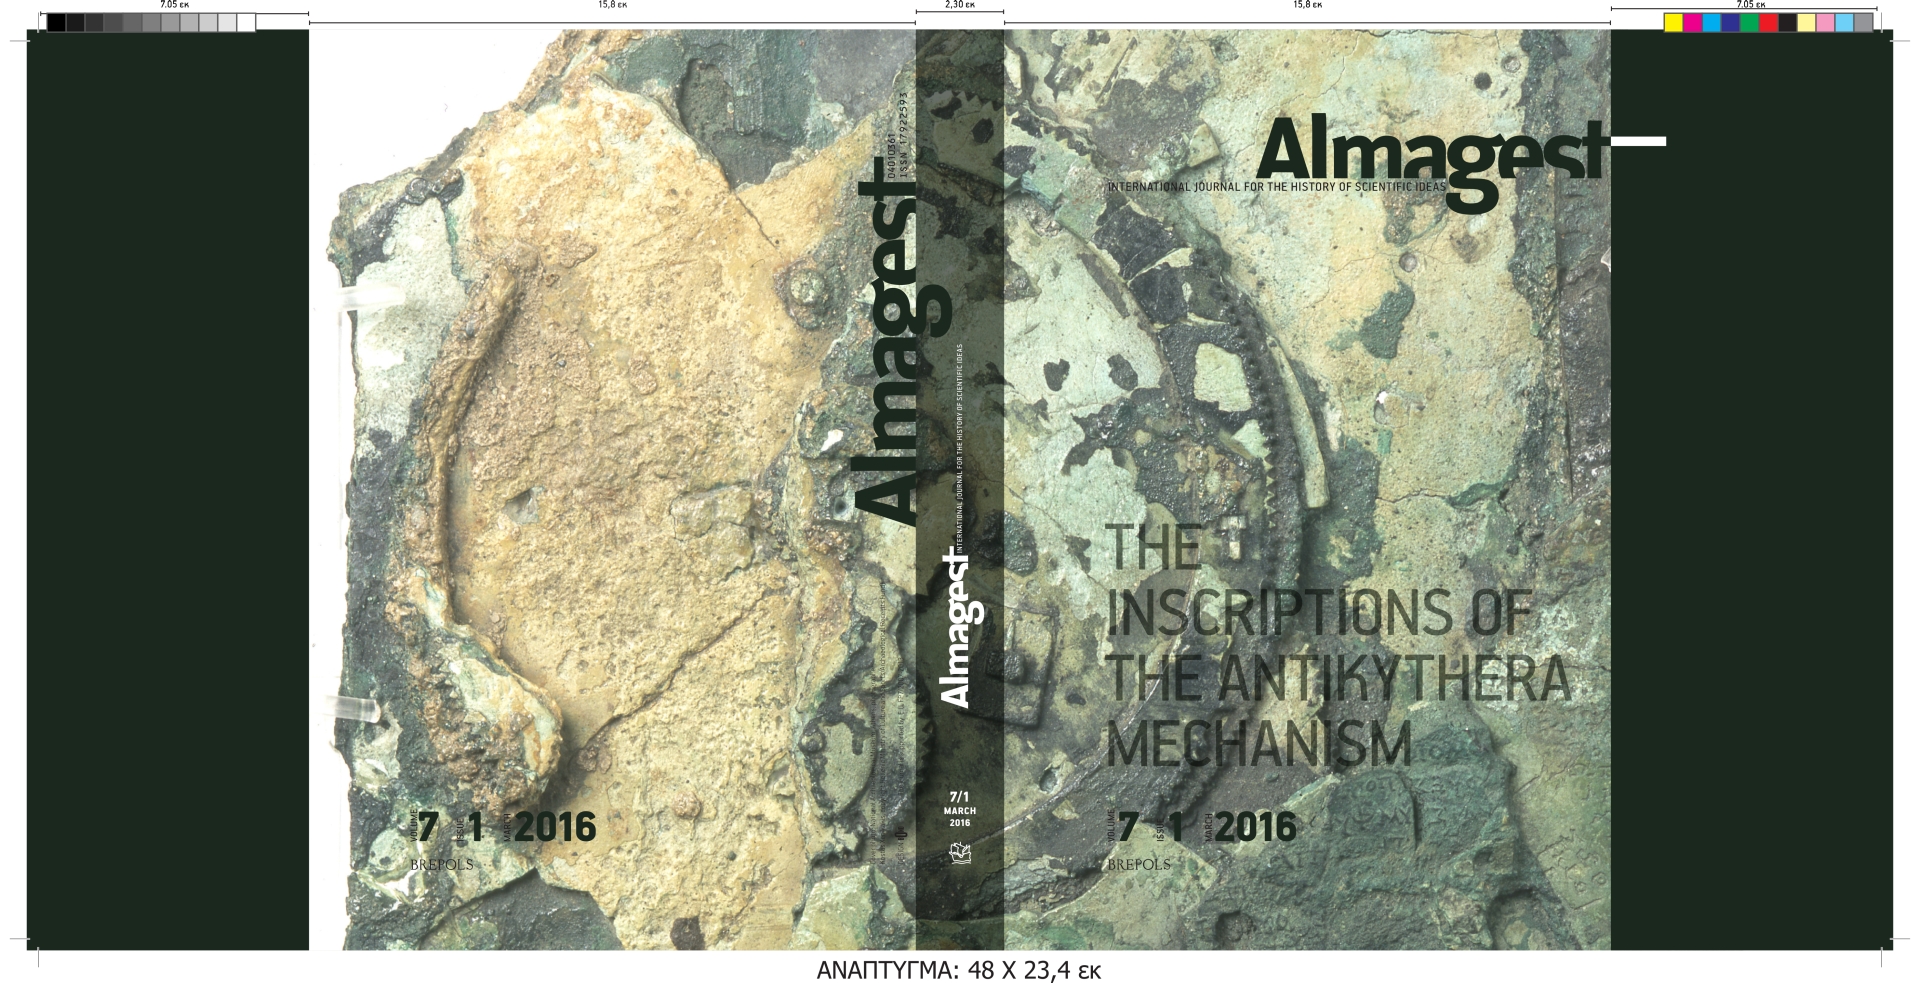 Almagest 7-1 cover